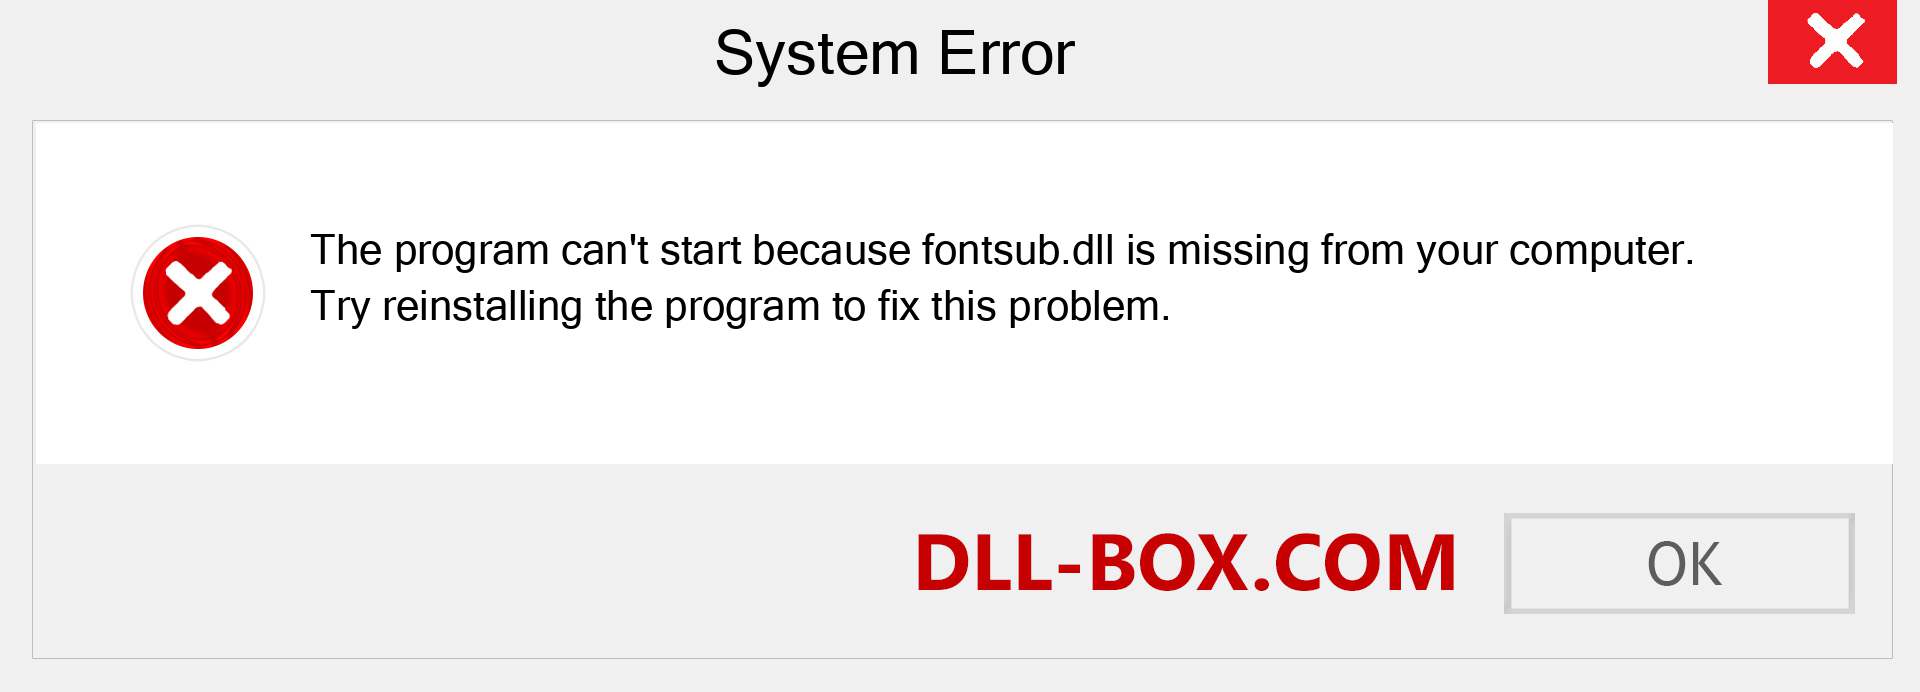  fontsub.dll file is missing?. Download for Windows 7, 8, 10 - Fix  fontsub dll Missing Error on Windows, photos, images